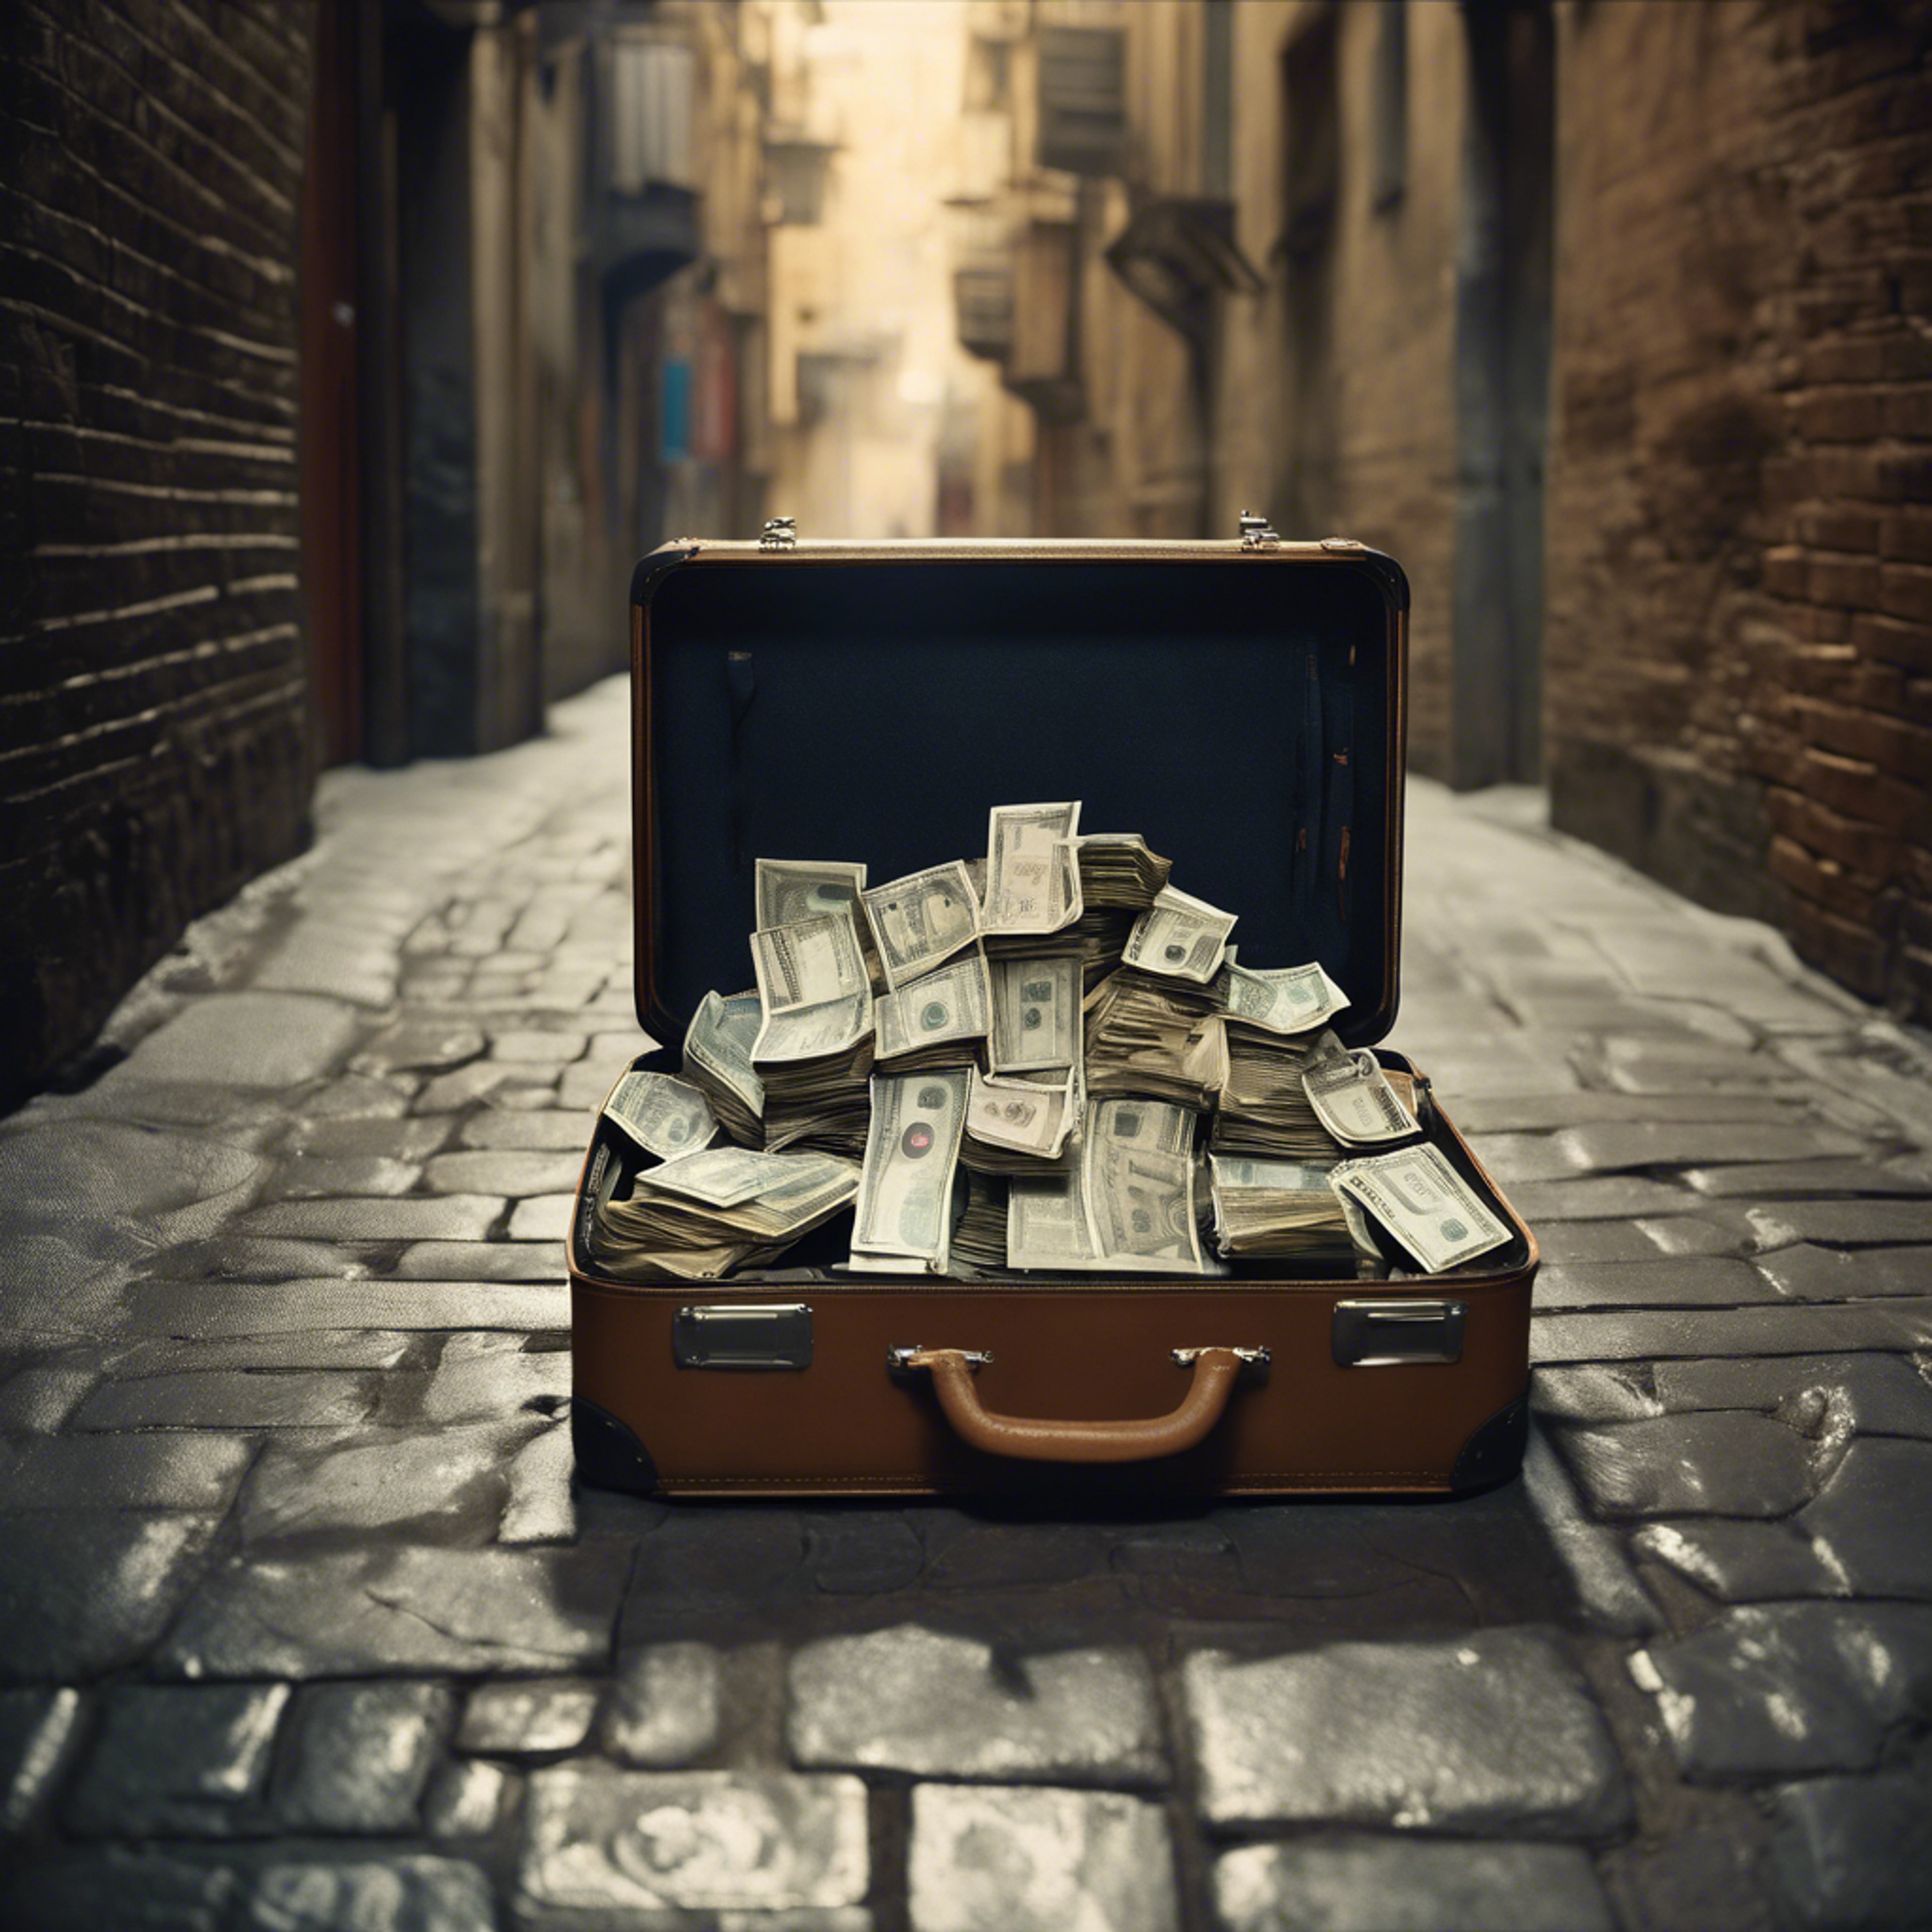 A suitcase filled with mafia money being exchanged in dimly lit alleyway. Tapet[001aead7b2c840f5bbce]